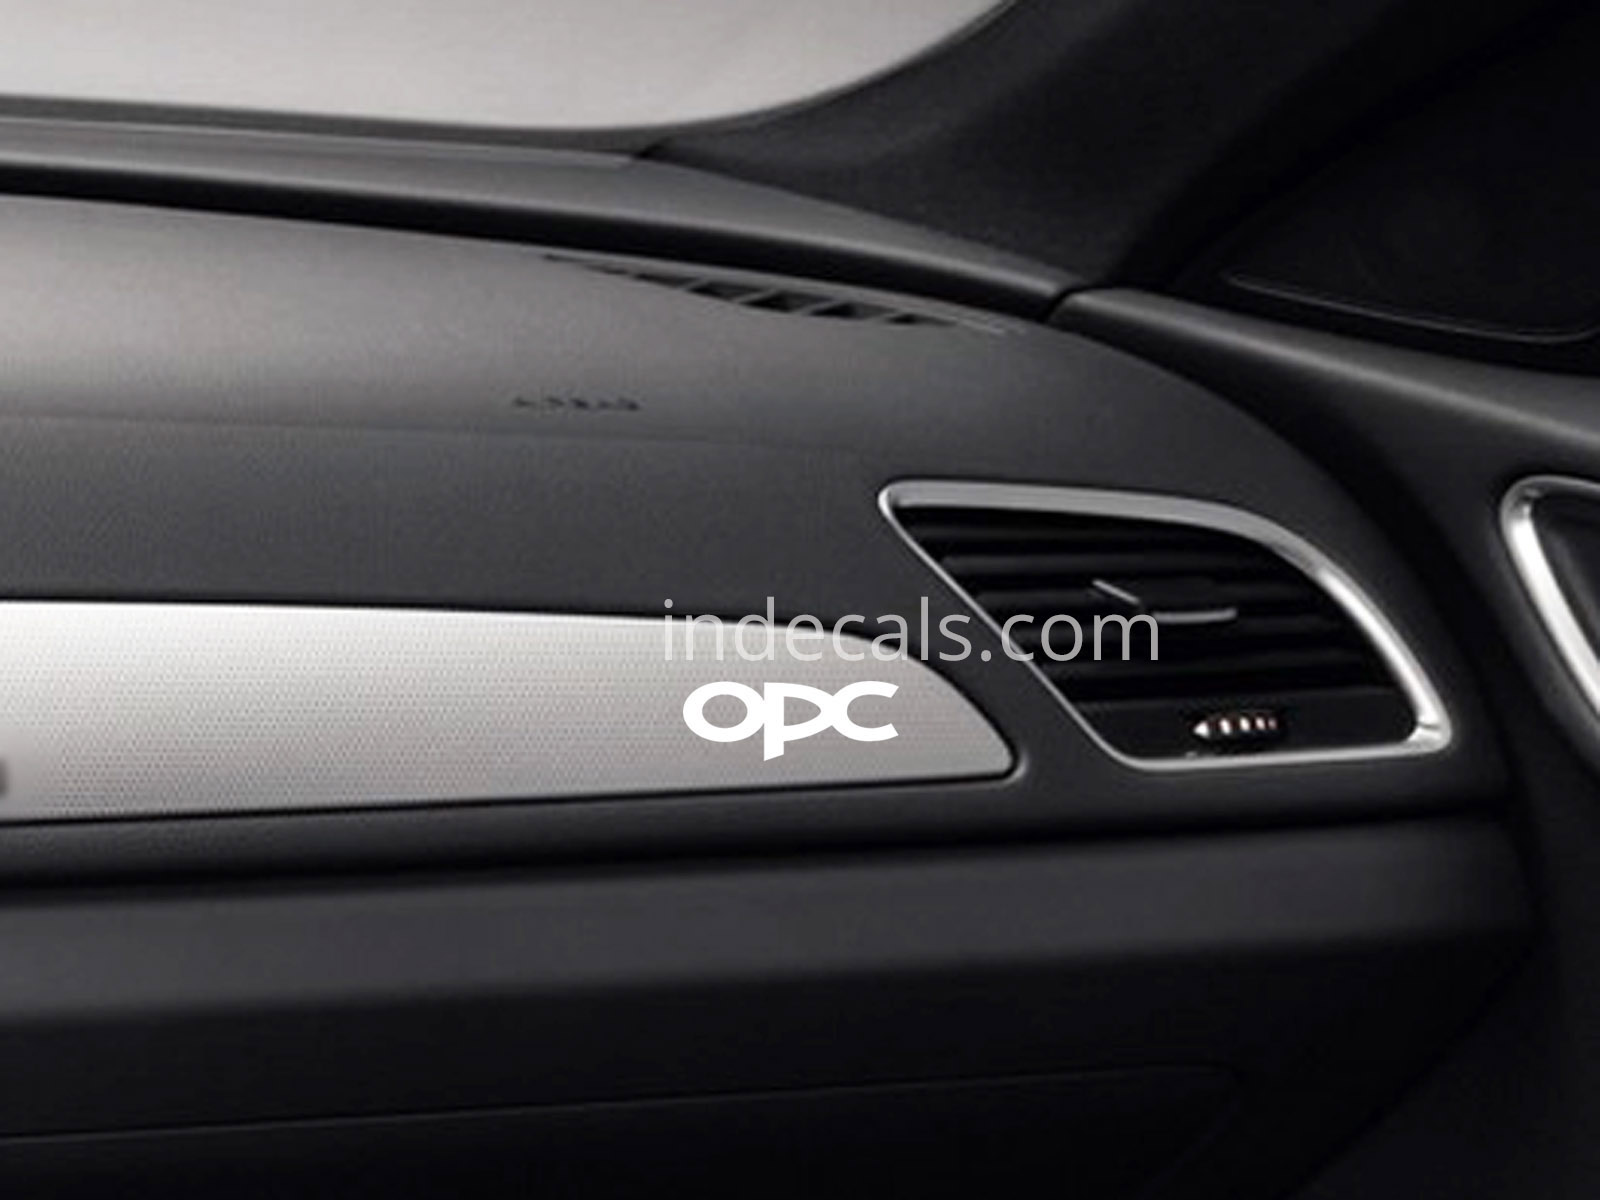 http://indecals.com/img/product/3887-3-x-Opel-OPC-Stickers-for-Dash-Trim--White.jpg